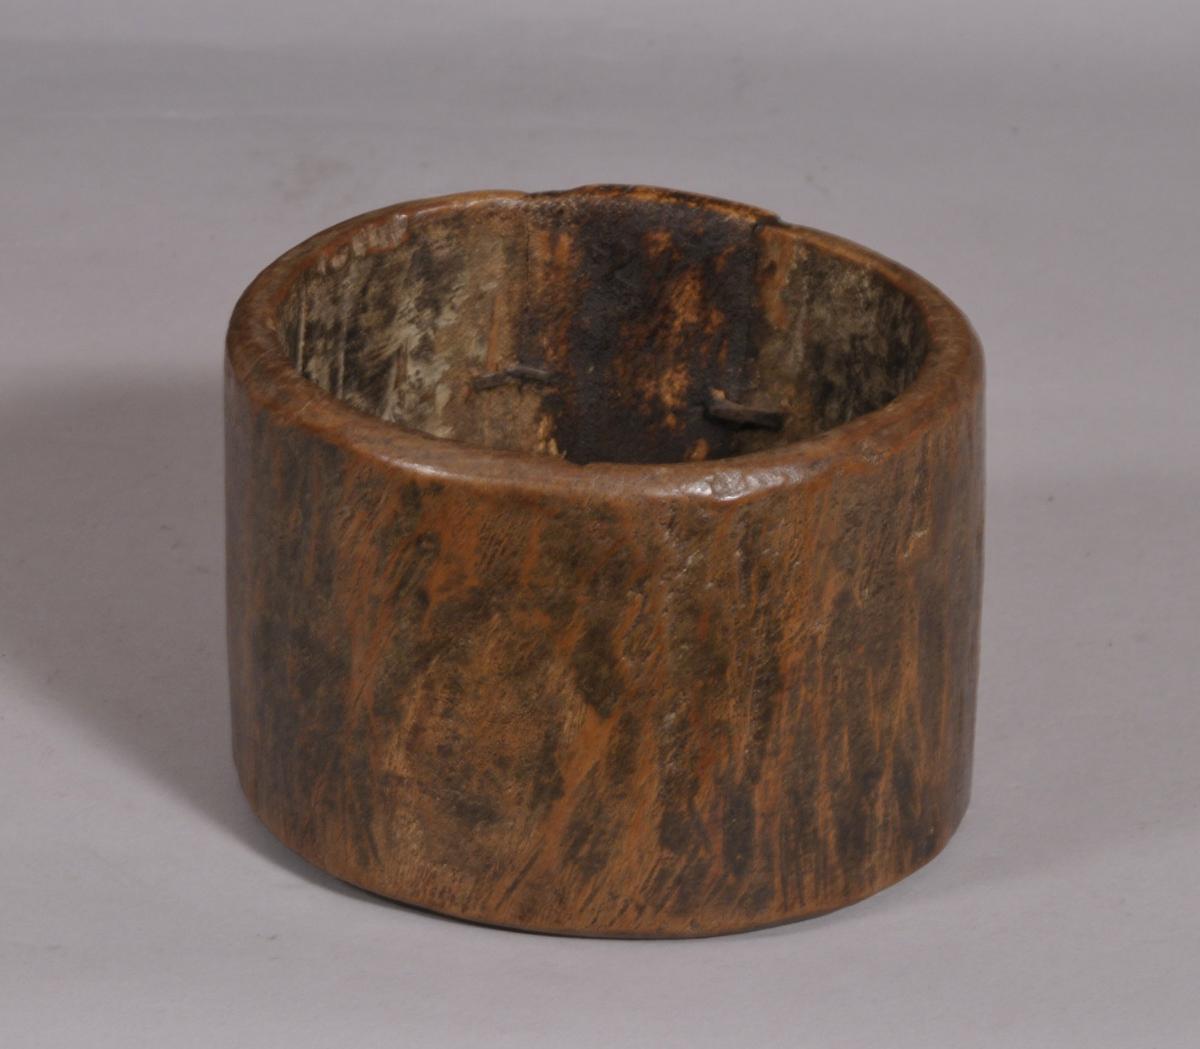 S/3887 Antique Treen 19th Century Asian Dug Out Bowl